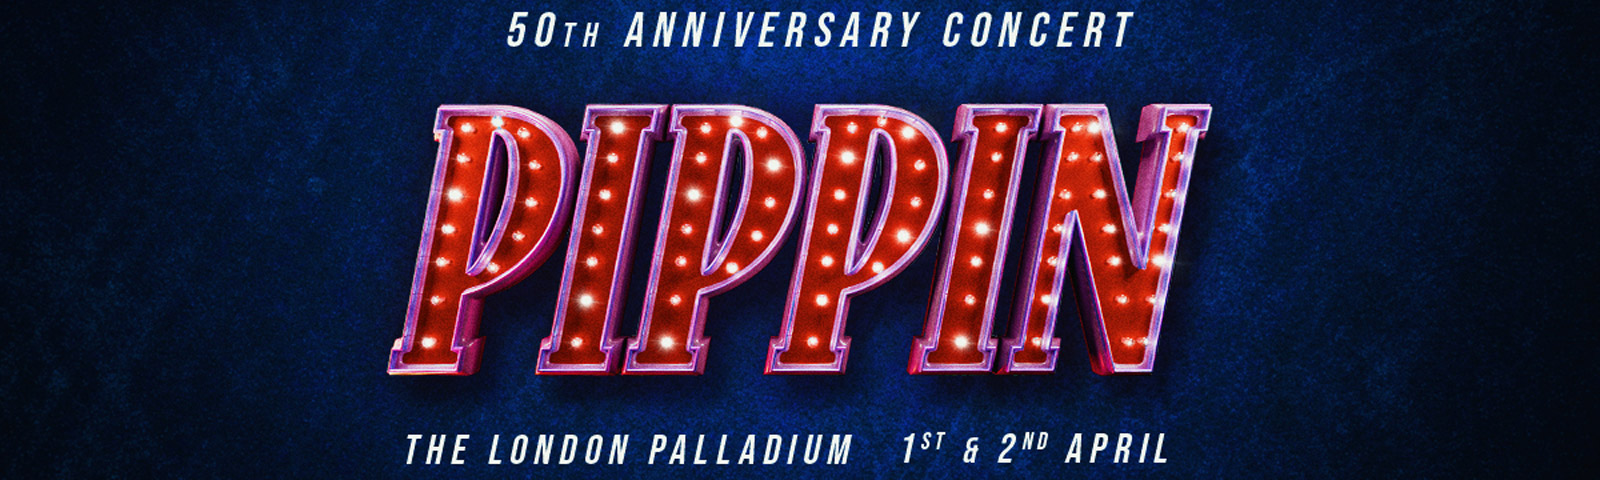 pippin-in-concert